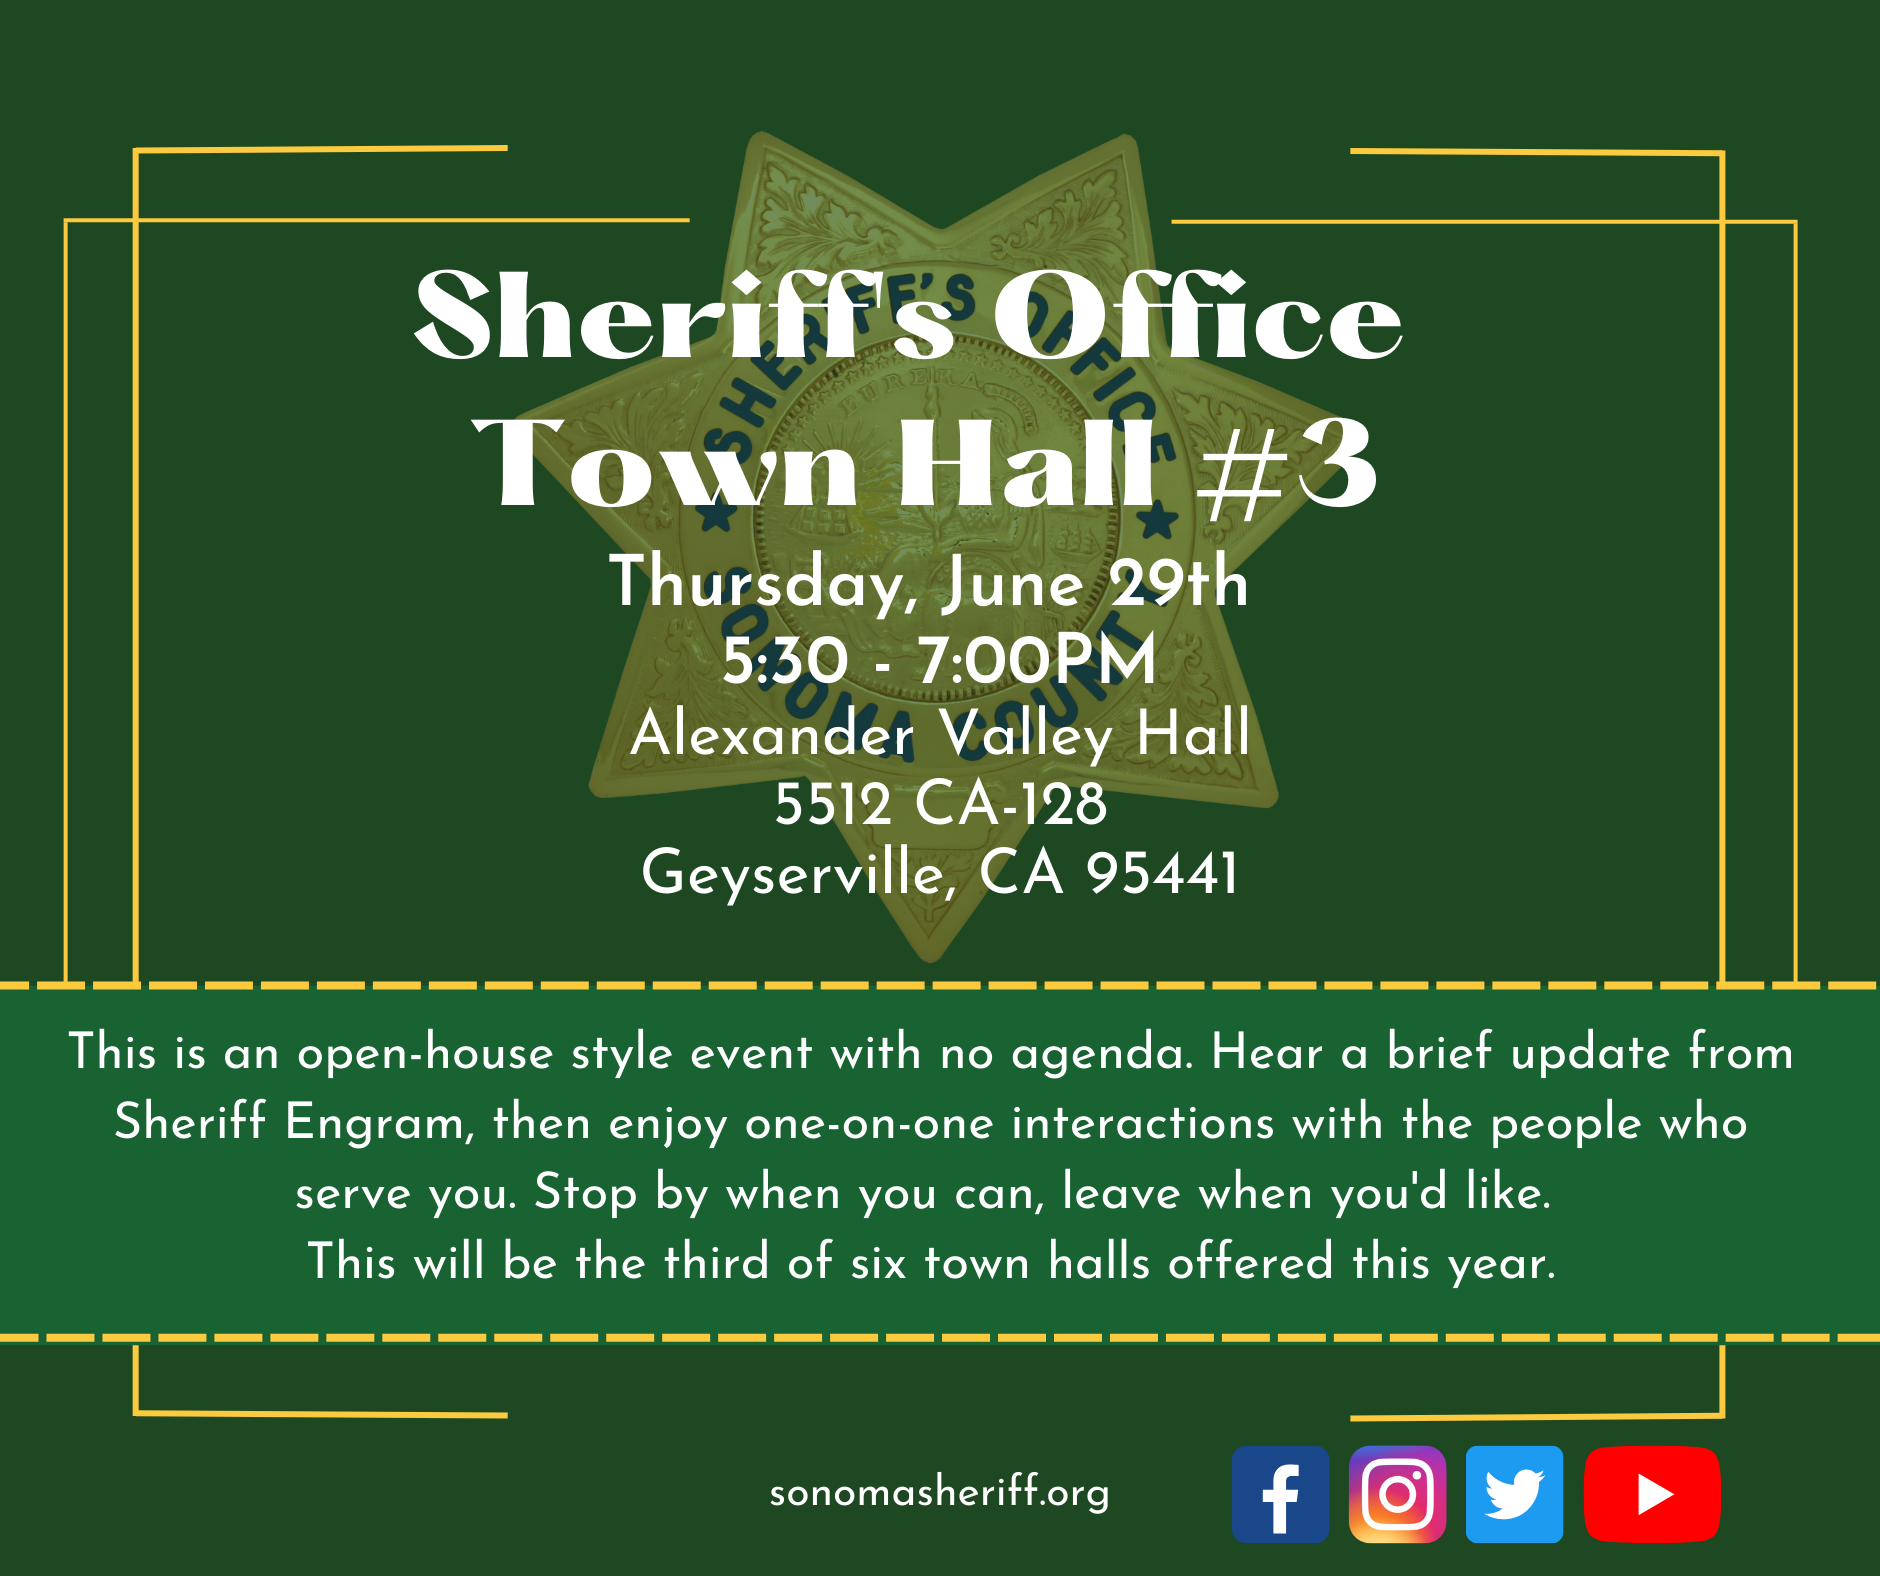 SHERIFF'S OFFICE TOWN HALL